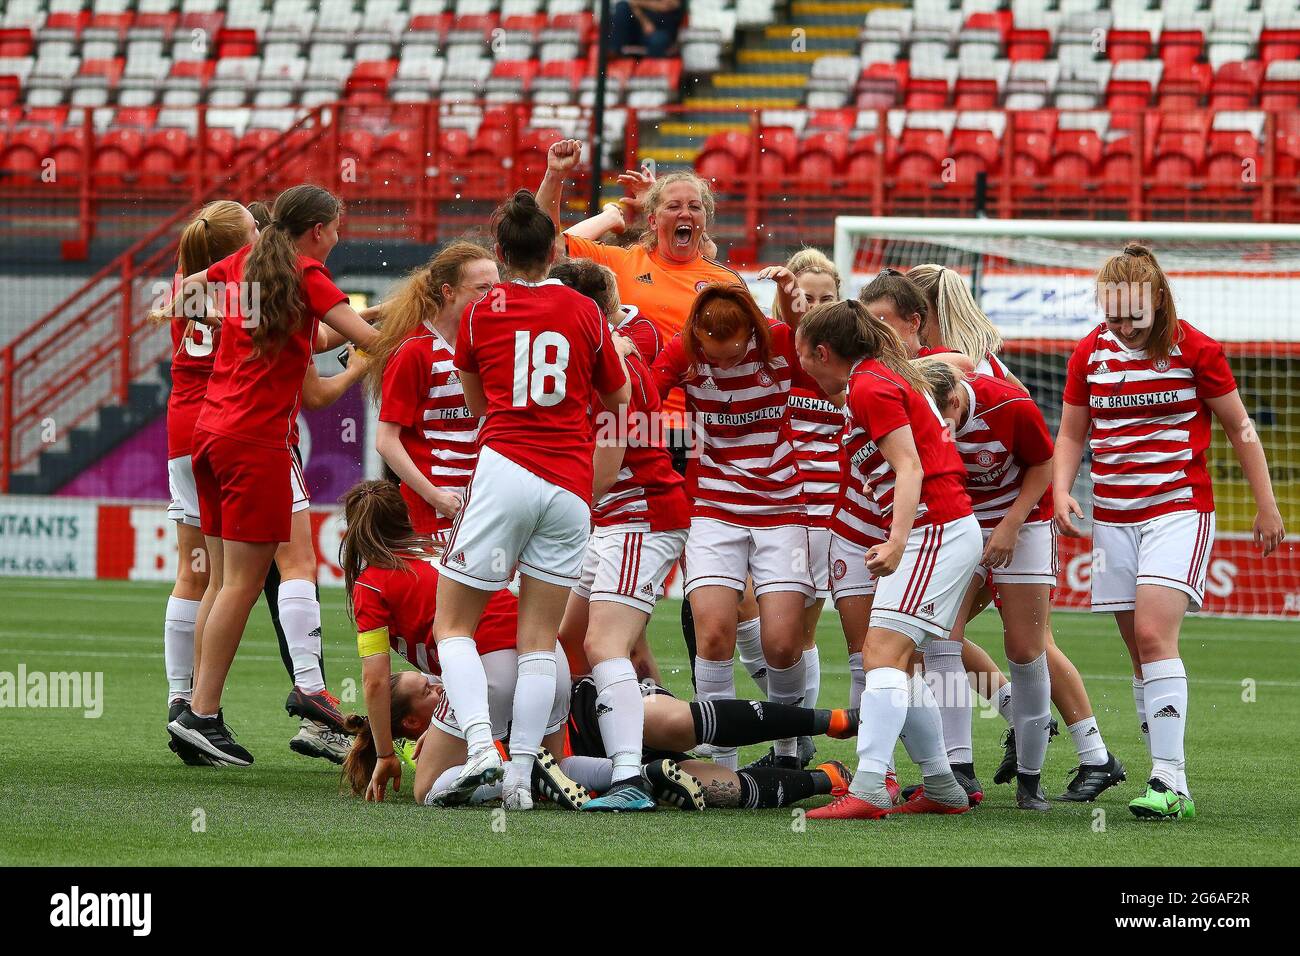 Celebrations as Hamilton Academical Womens FC gain promotion into the top flight of Scottish Womens Football following their 3-0 victory during the Scottish Building Society Scottish Women's Premier League 2 Fixture Hamilton Academical FC vs Kilmarnock FC, Fountain of Youth Stadium, Hamilton, South Lanarkshire, 04/07/2021 | Credit Colin Poultney | www.Alamy.co.uk Stock Photo